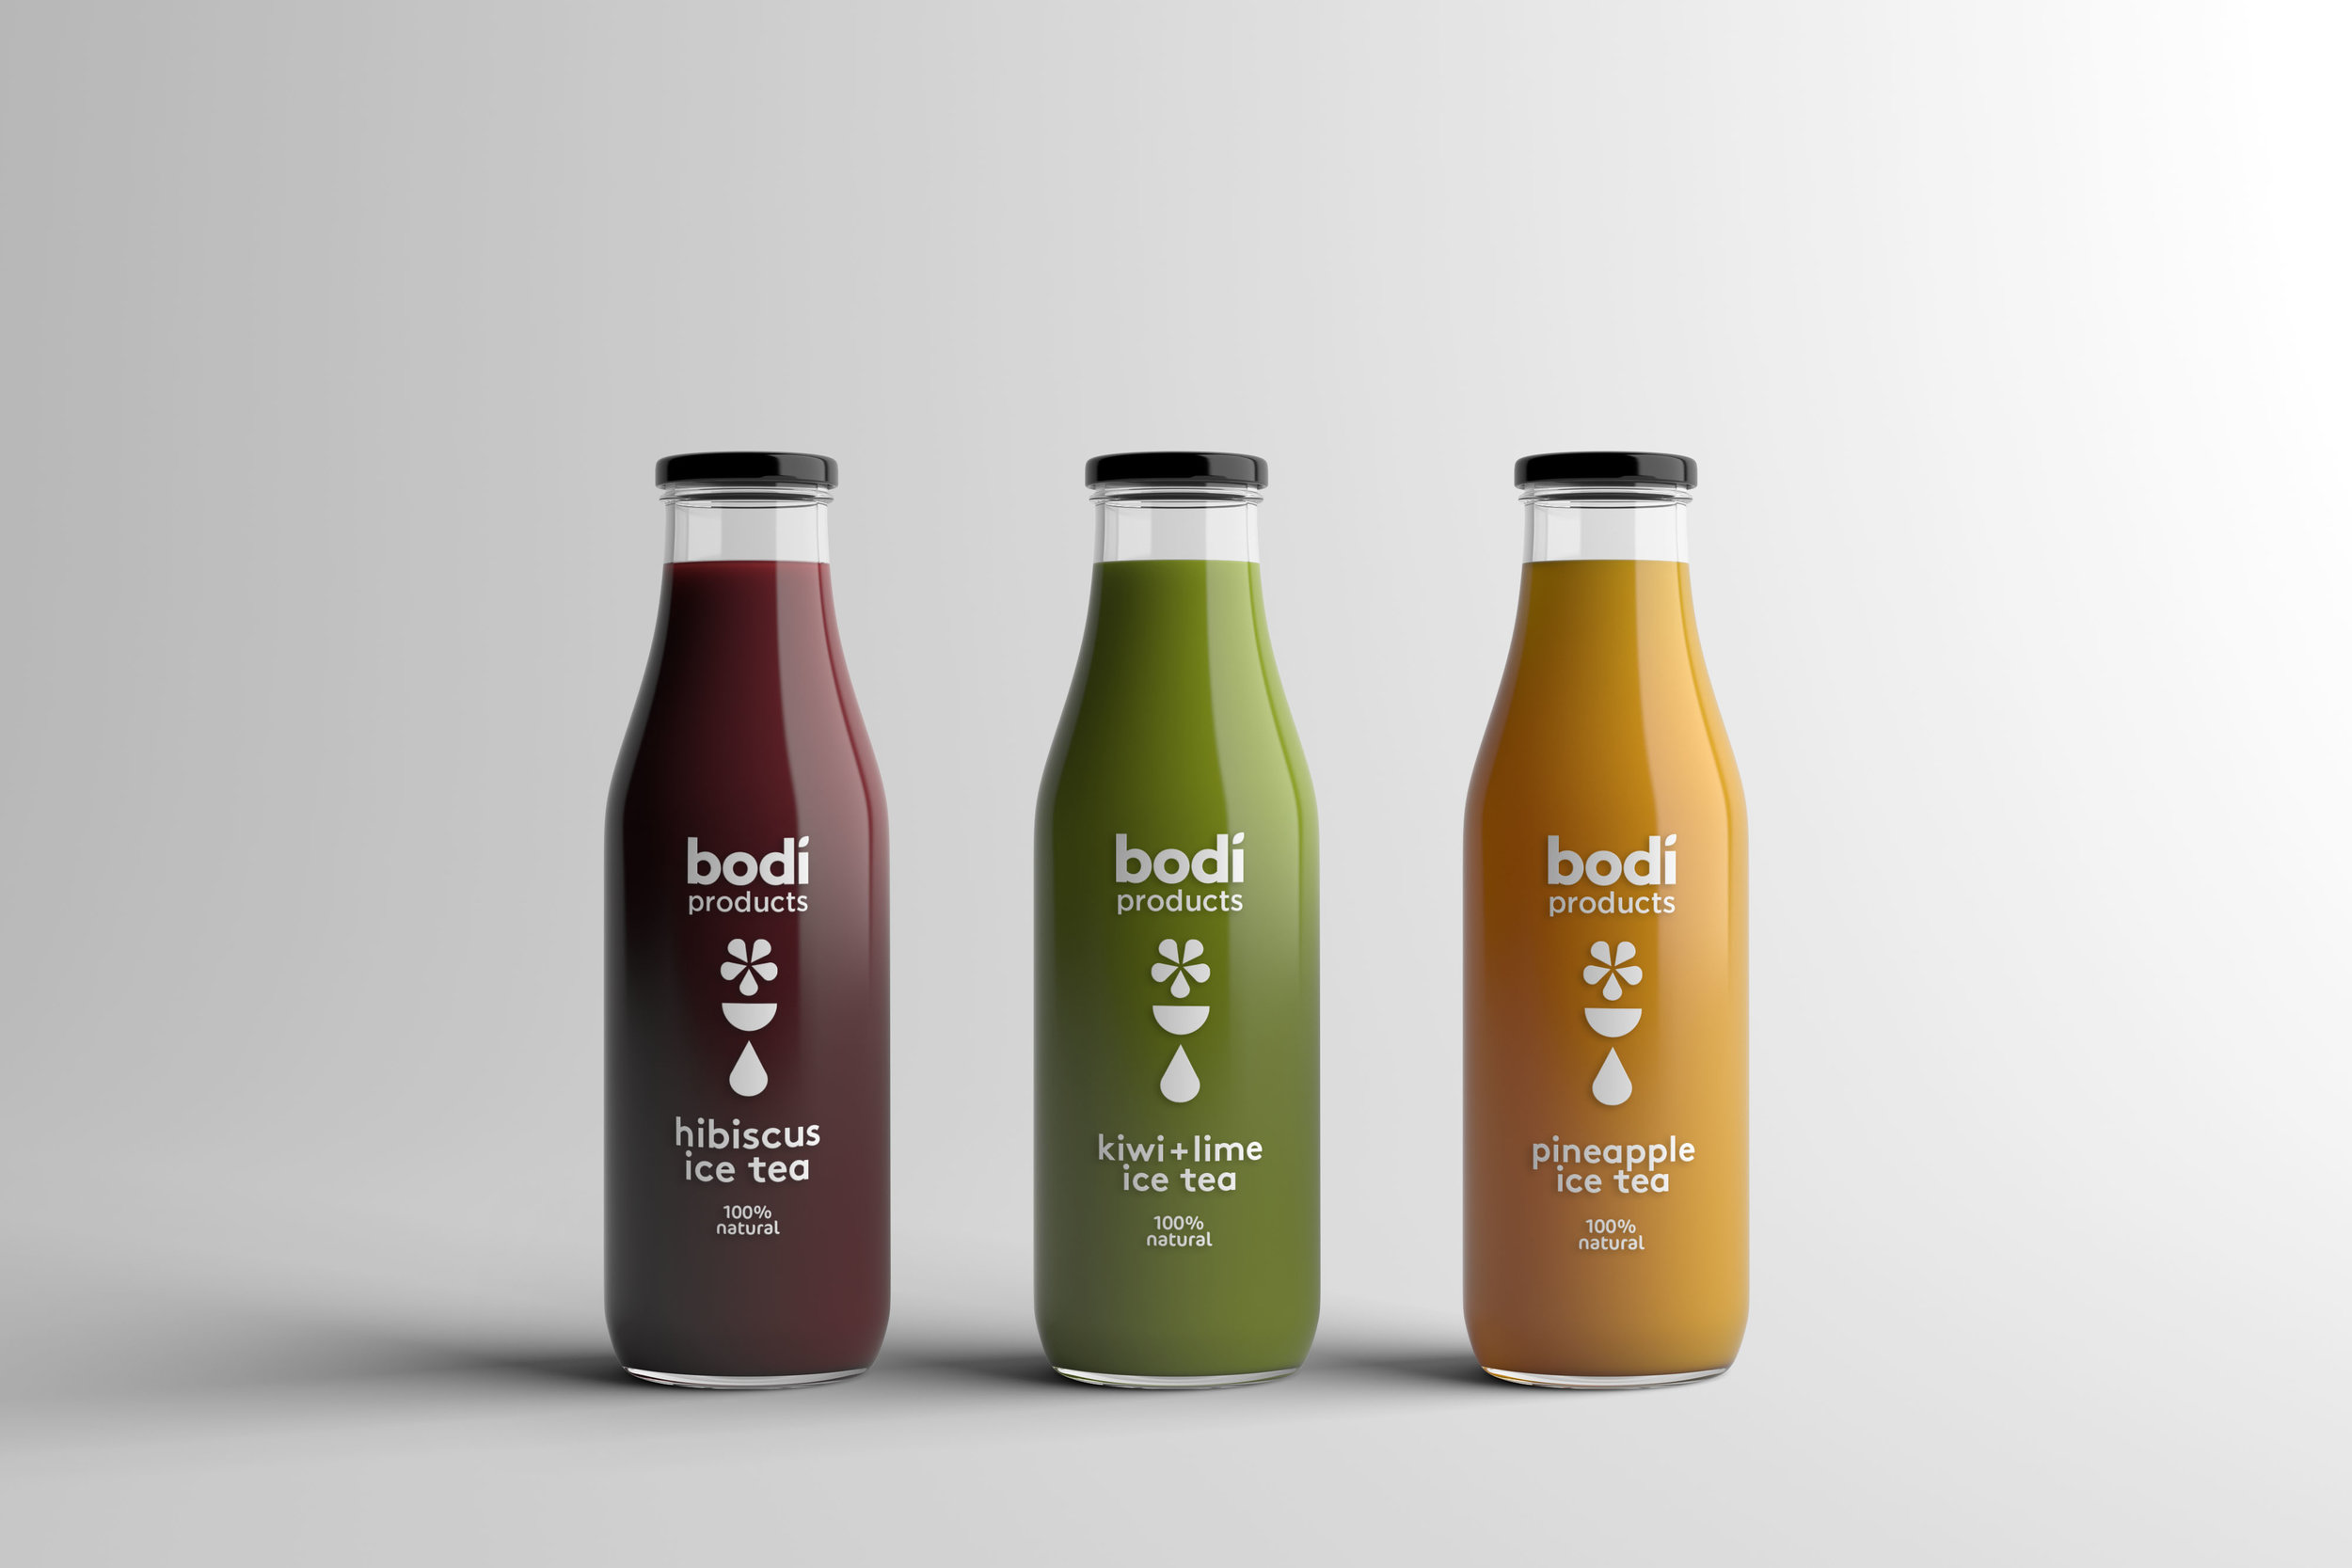 Fresh Branding and Packaging Design for a New Startup Health Drink Brand